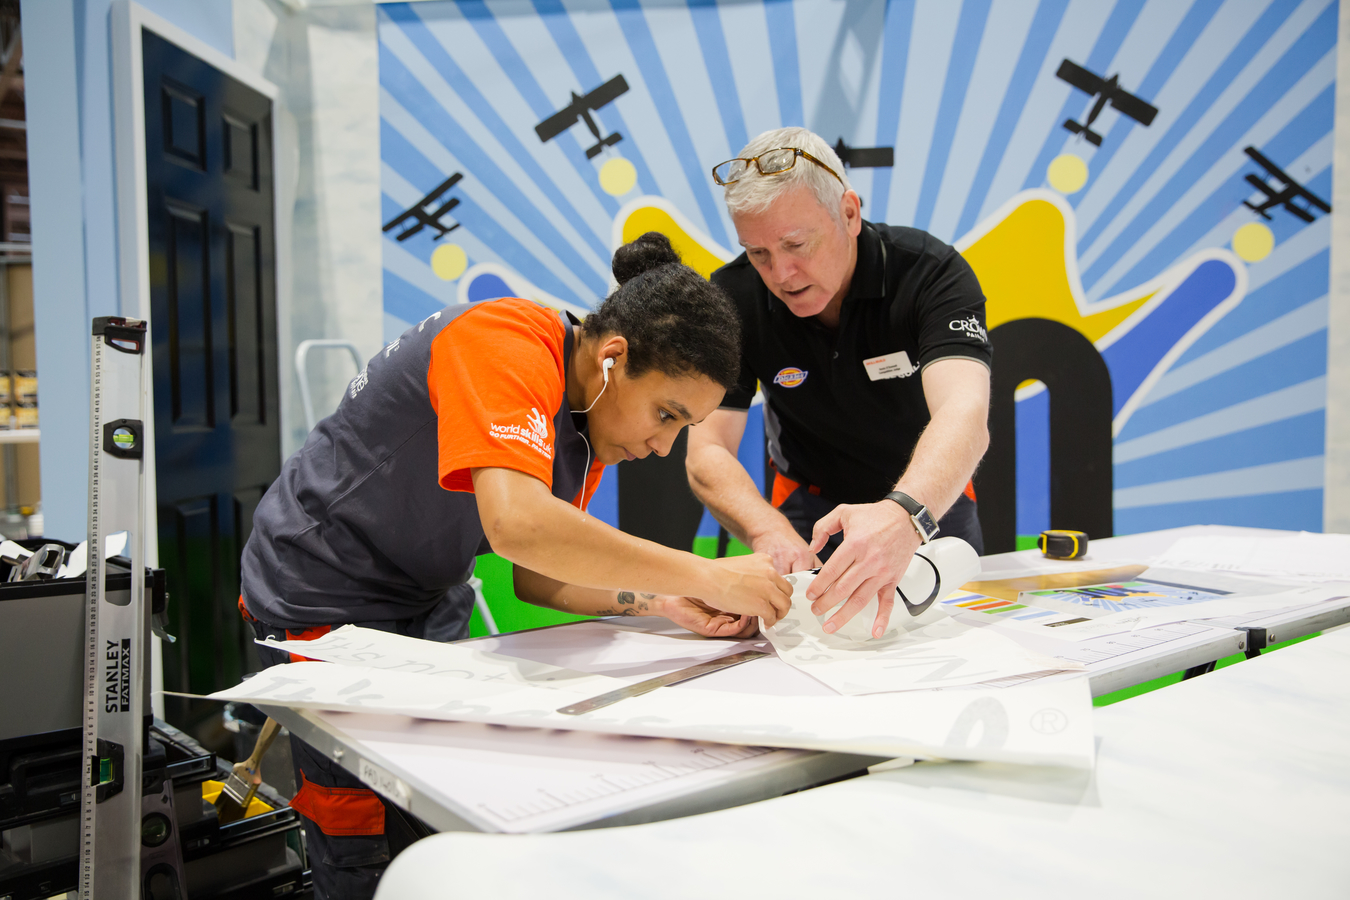 Apprentice Decorator of the Year competition returns